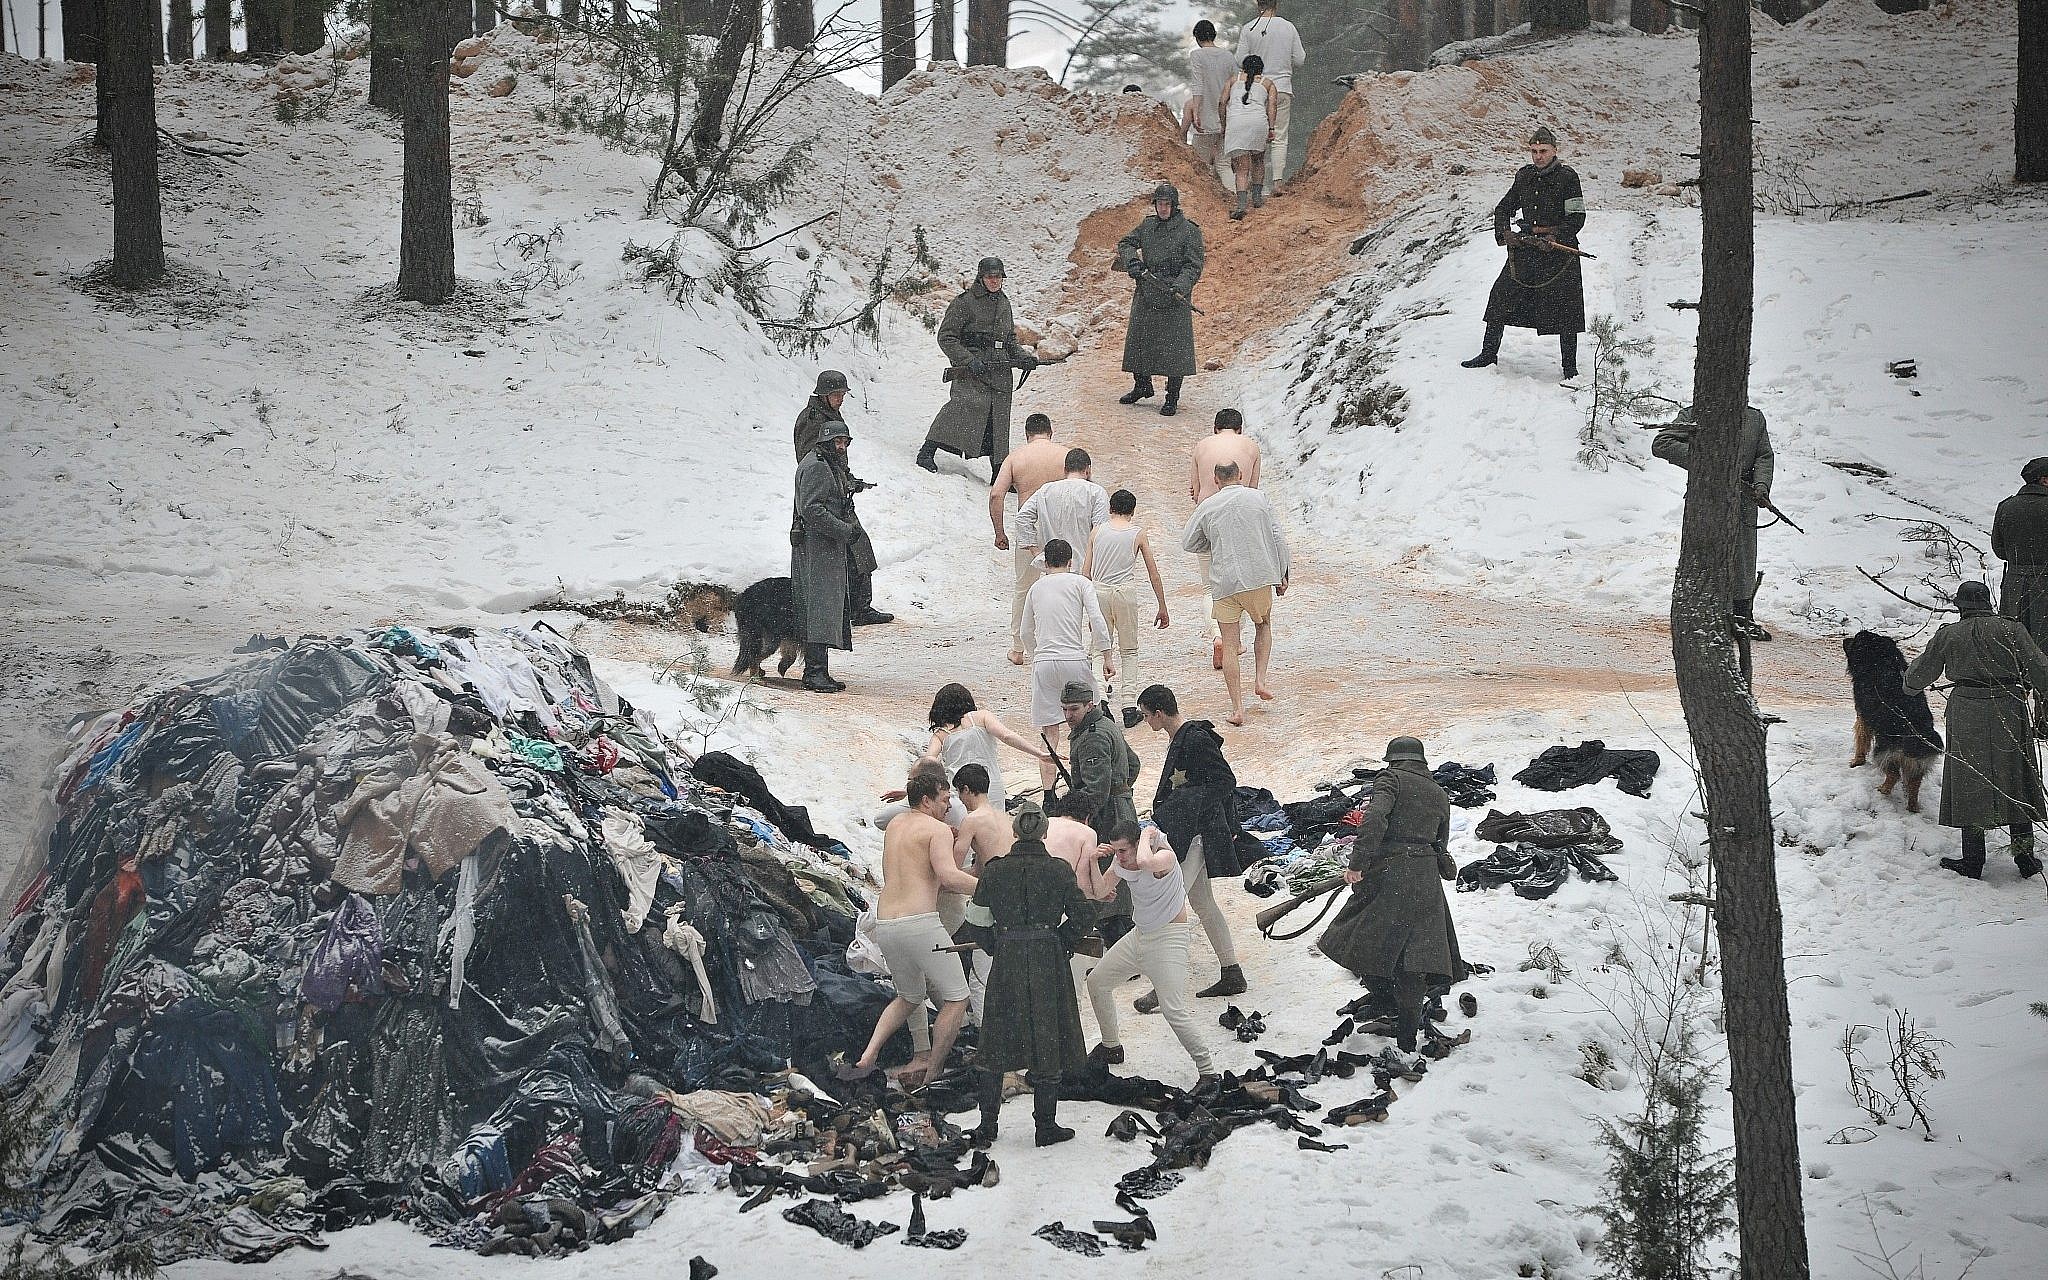 Illustrative: The infamous Rumbula massacre, in which around 25,000 Jews died over two days in late 1941, is depicted in a still from the new Latvian Holocaust historical drama film 'The Mover.' (Courtesy Washington Jewish Film Festival)